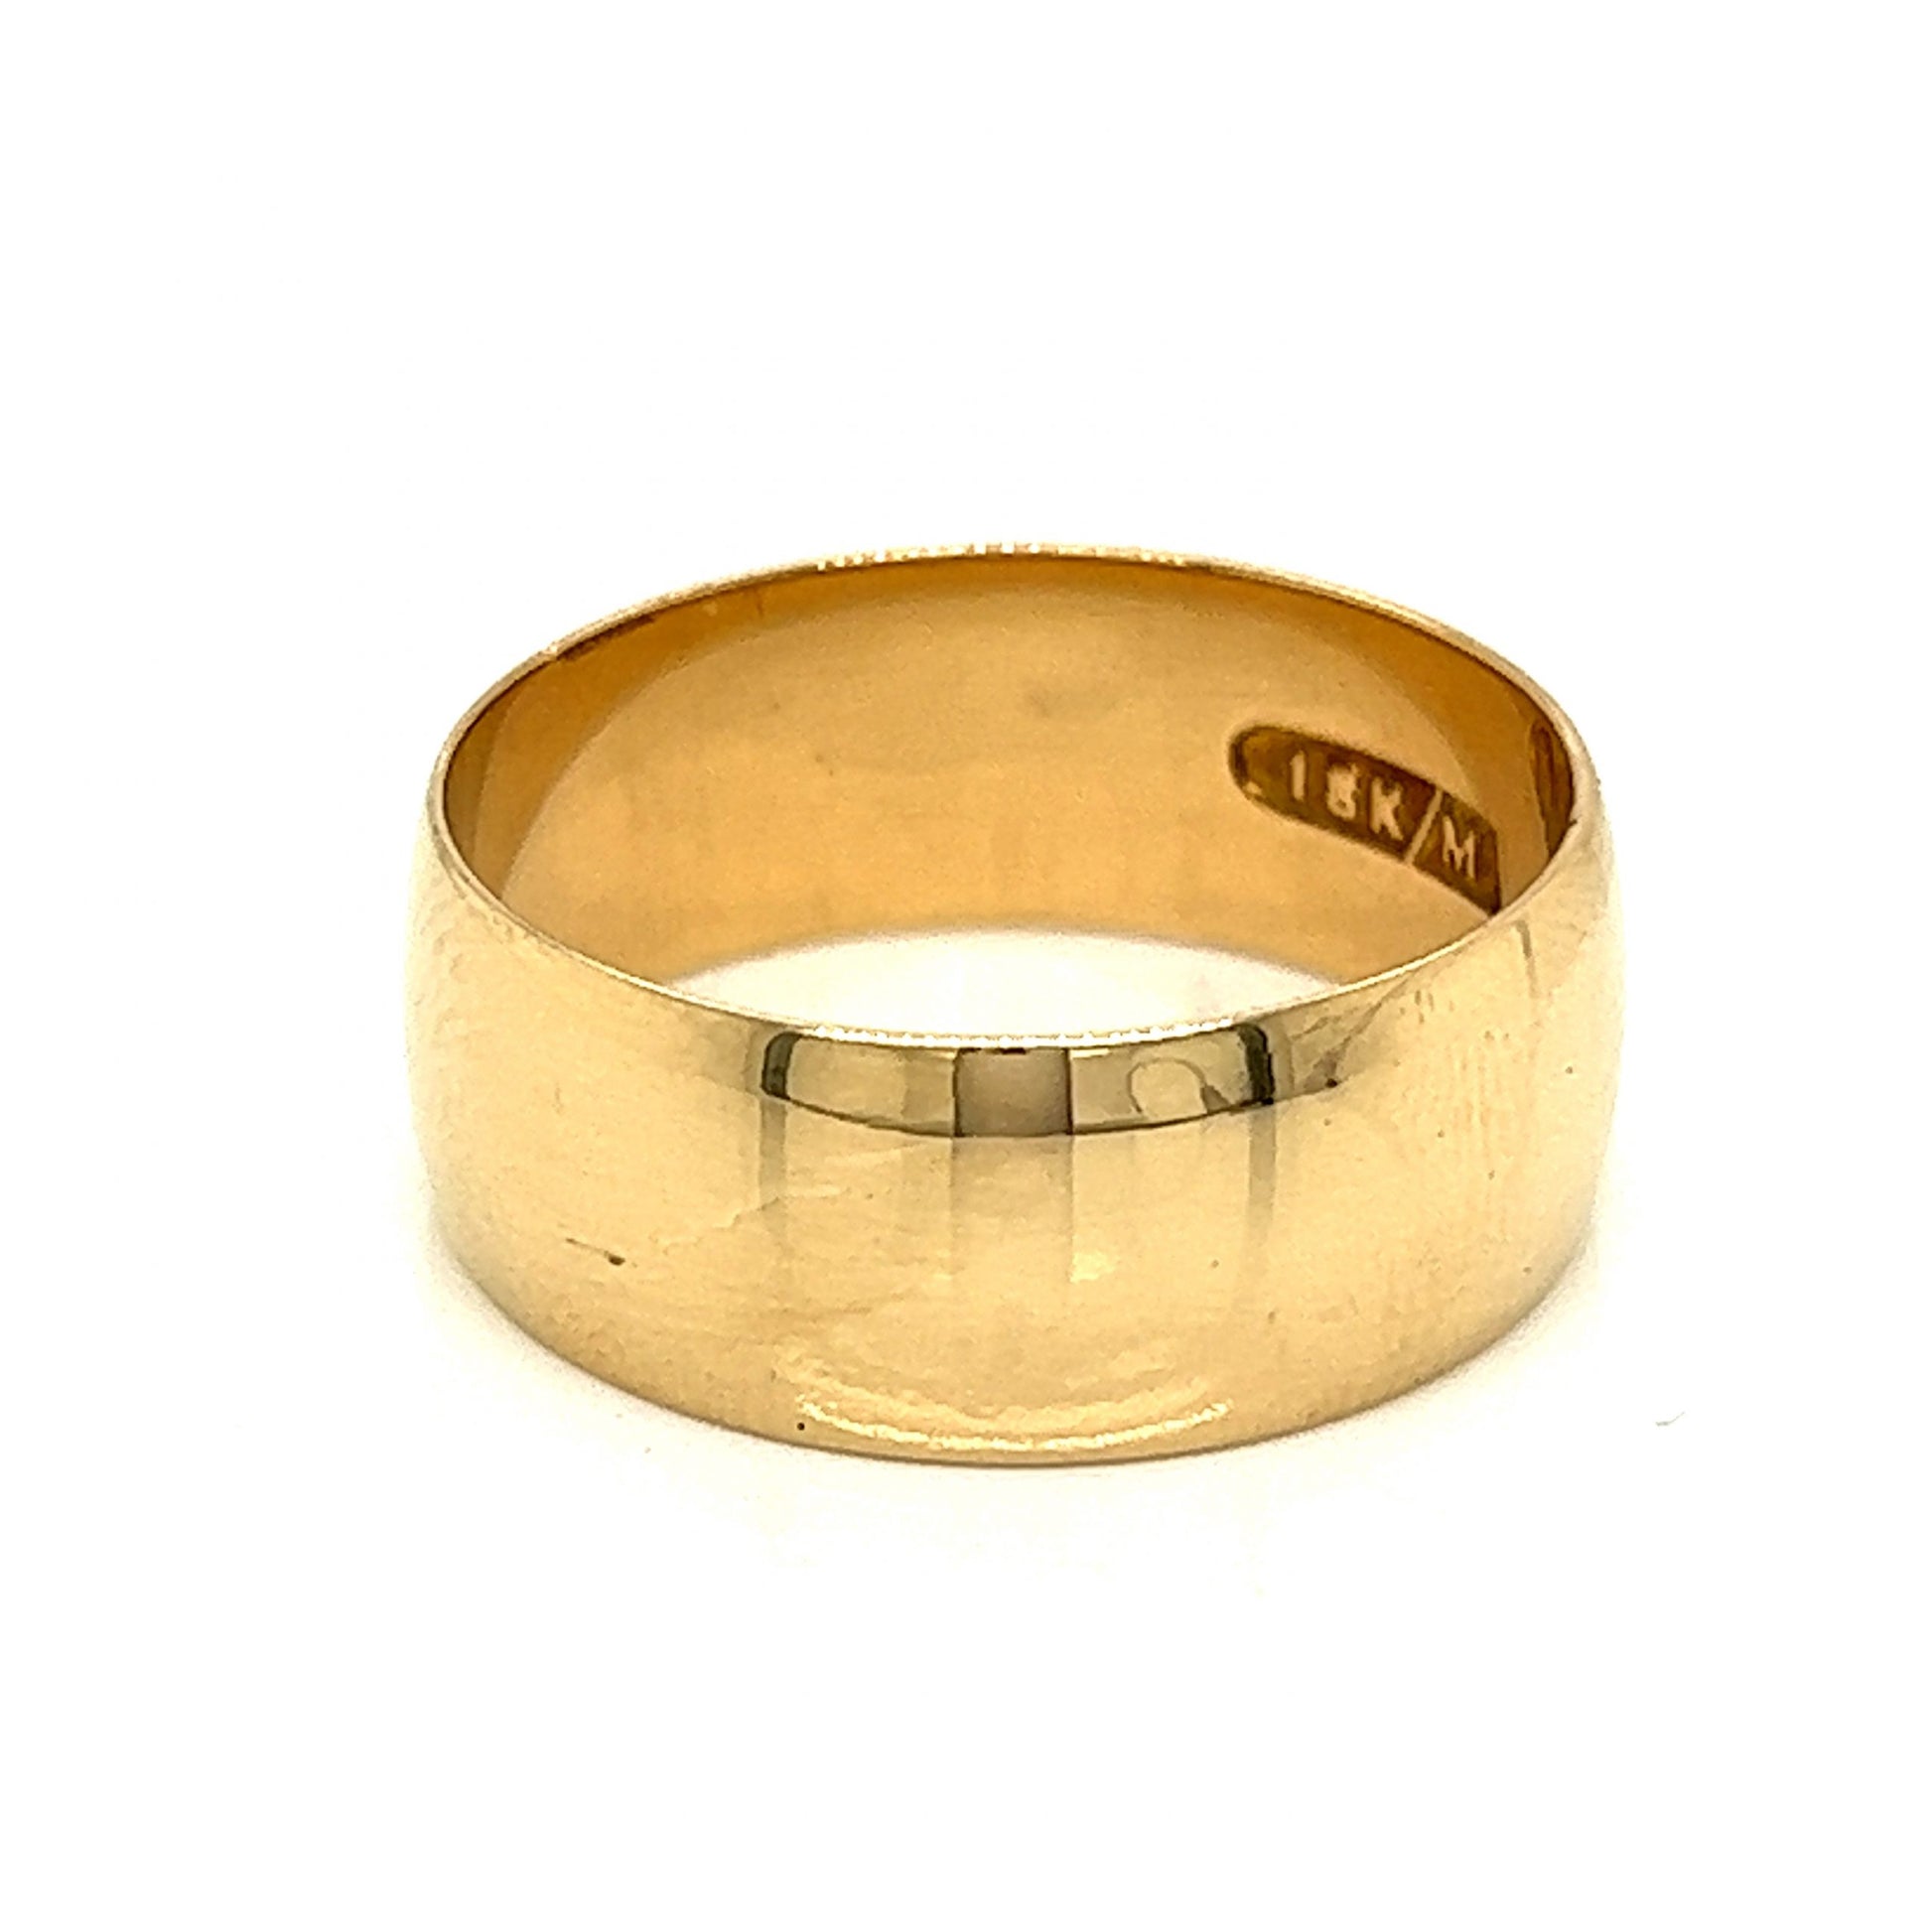 Men's Victorian Wide Wedding Band in 18k Yellow GoldComposition: 18 Karat Yellow Gold Ring Size: 10 Total Gram Weight: 6.8 g Inscription: 18K/M
      